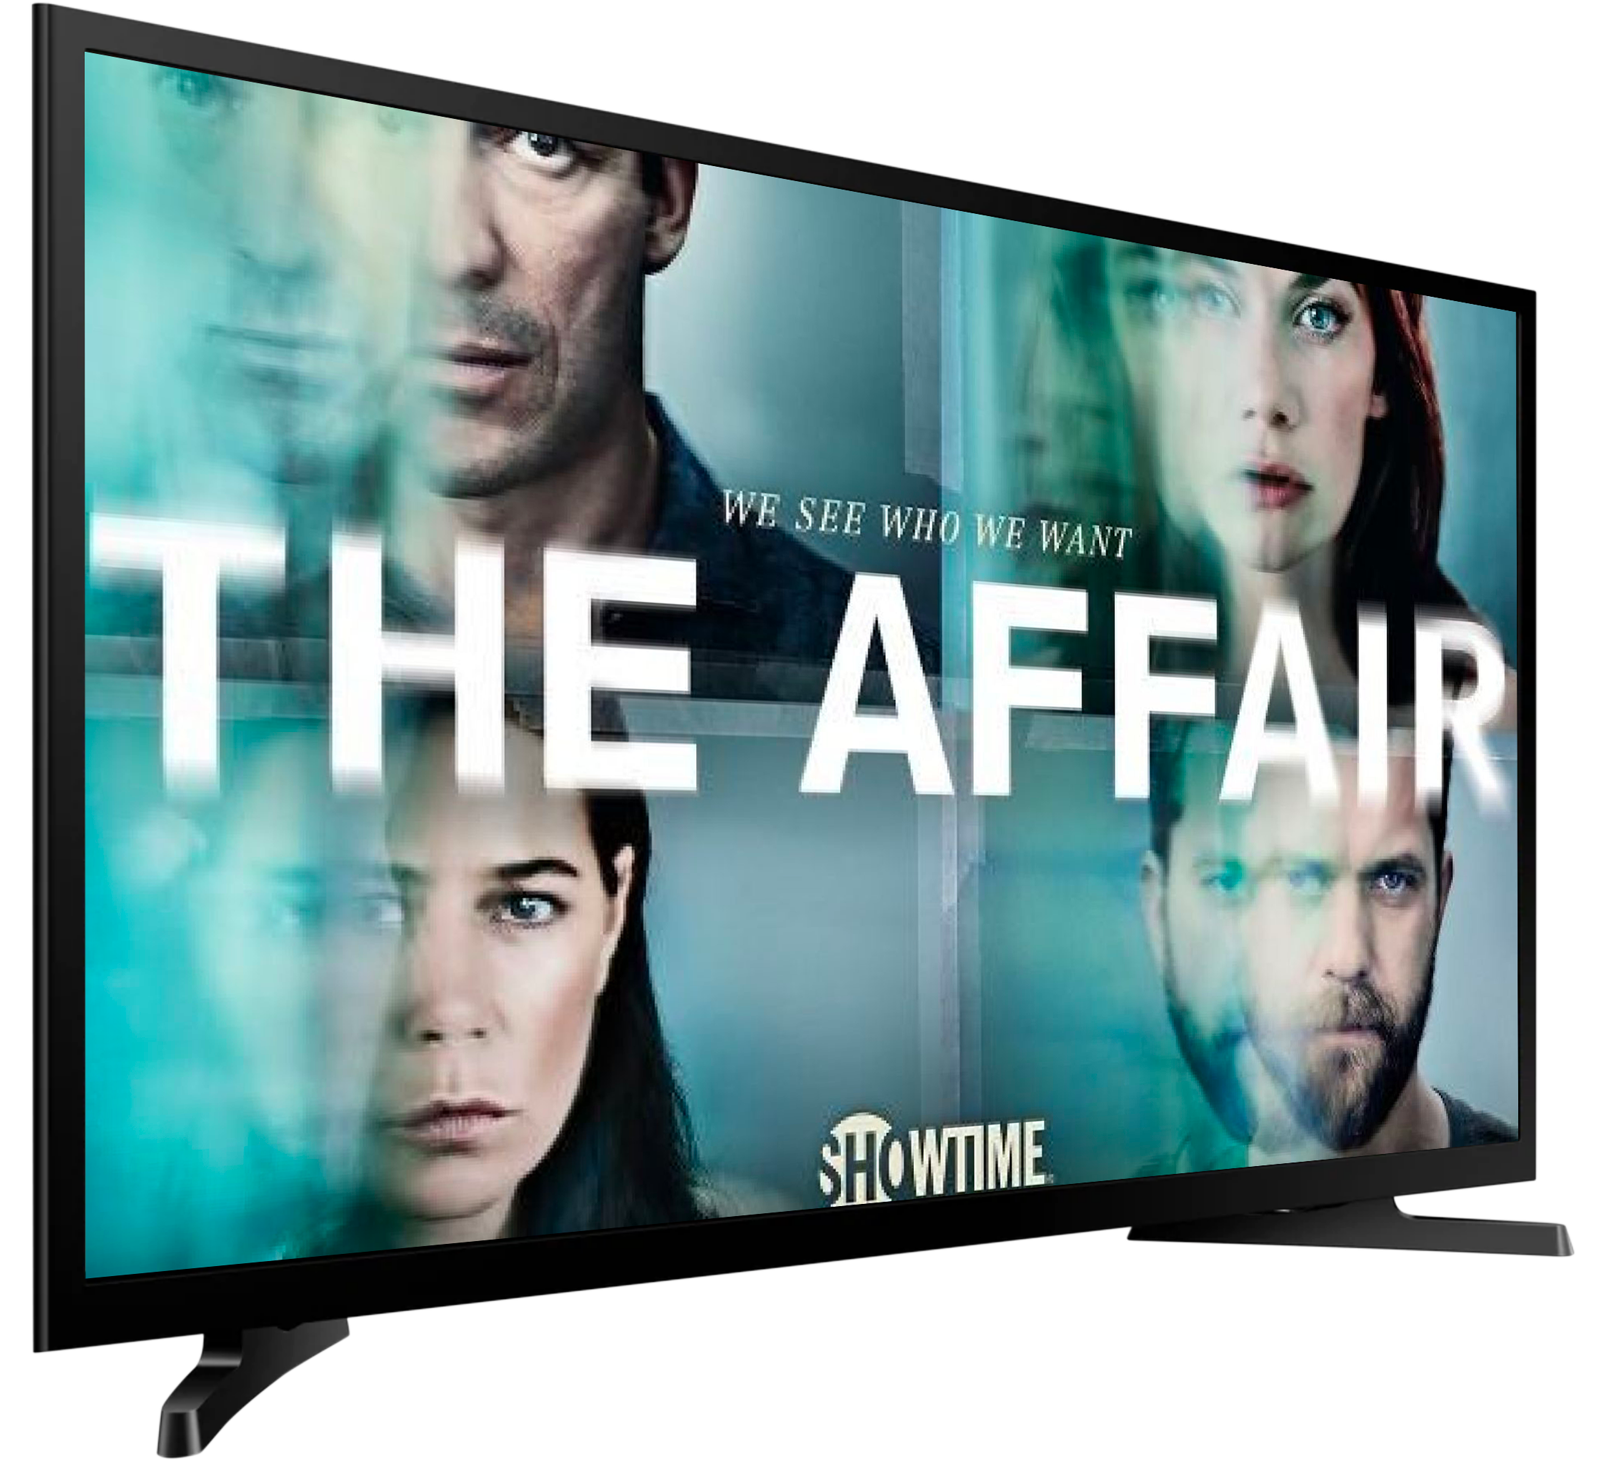 A new season of The Affair is here and it's only available on on SHOWTIME. Watch new episodes every Sunday at 9PM